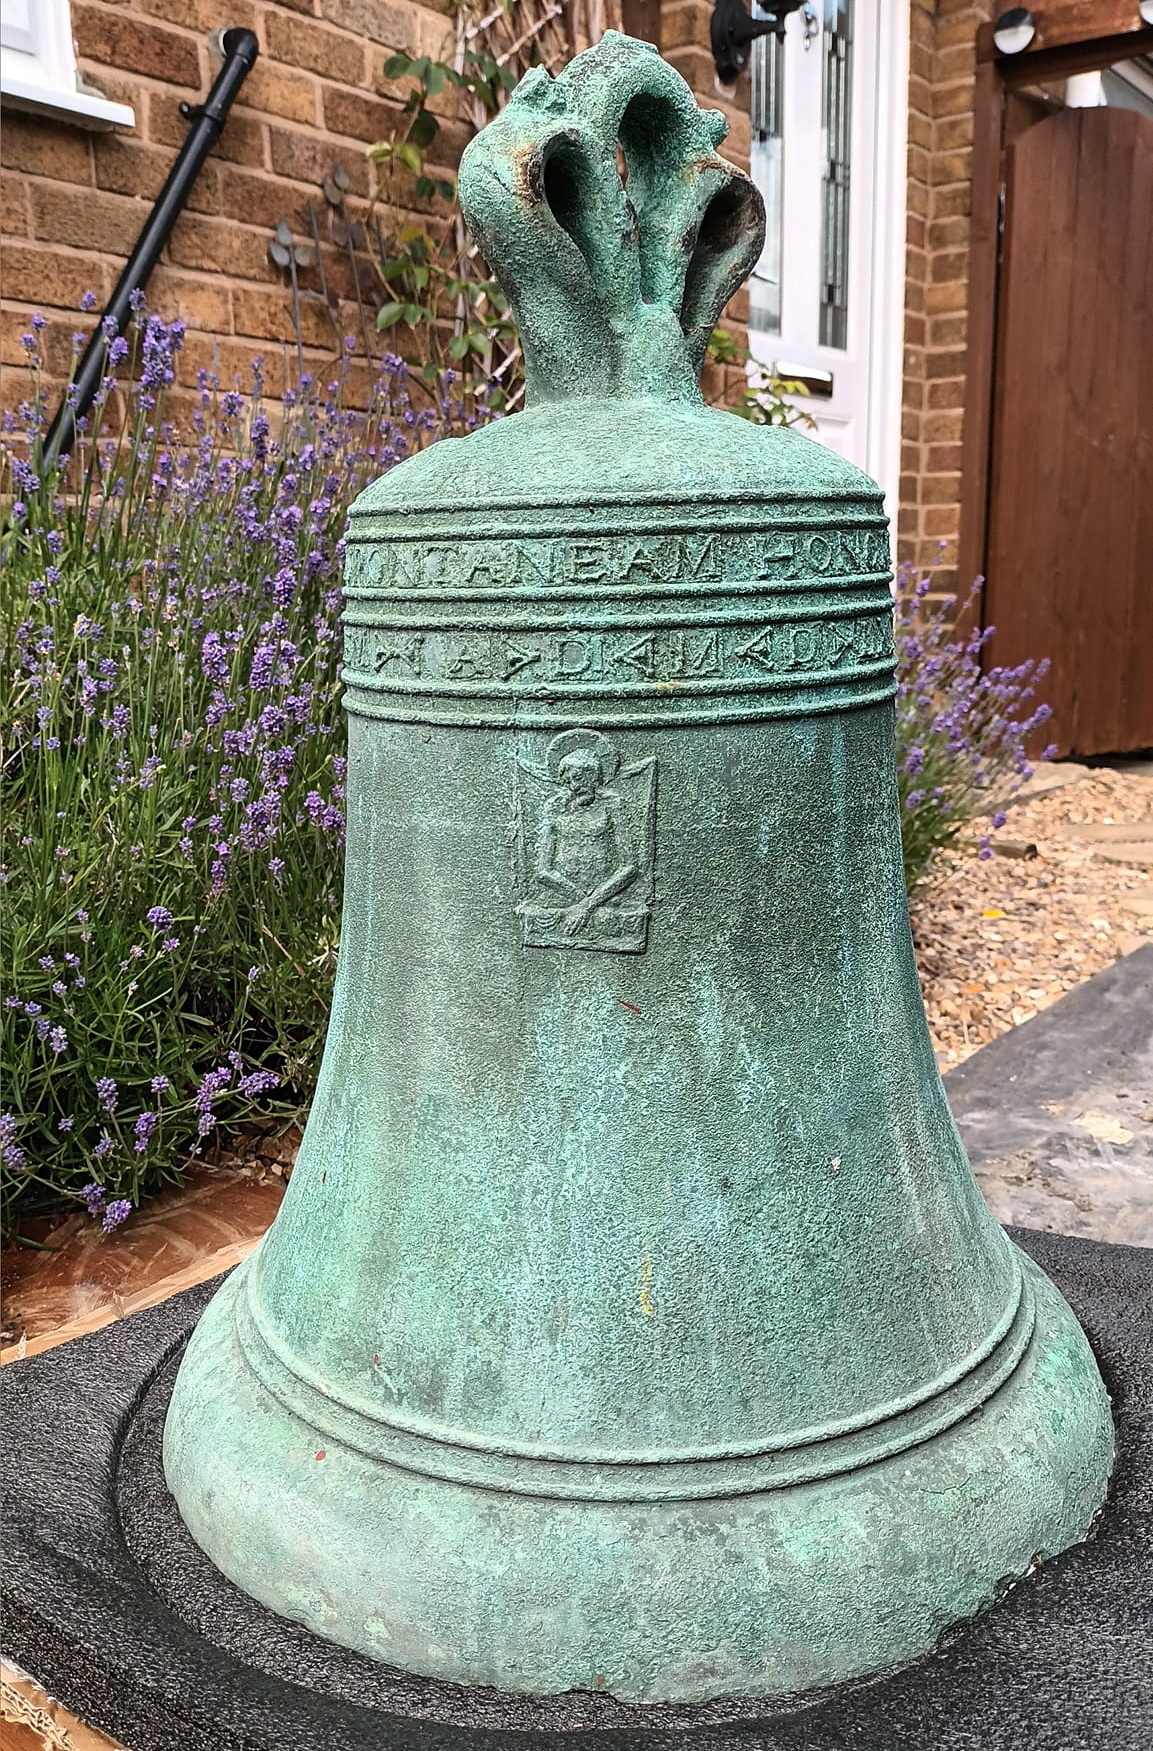 The historc Sanctus bell rescued by James